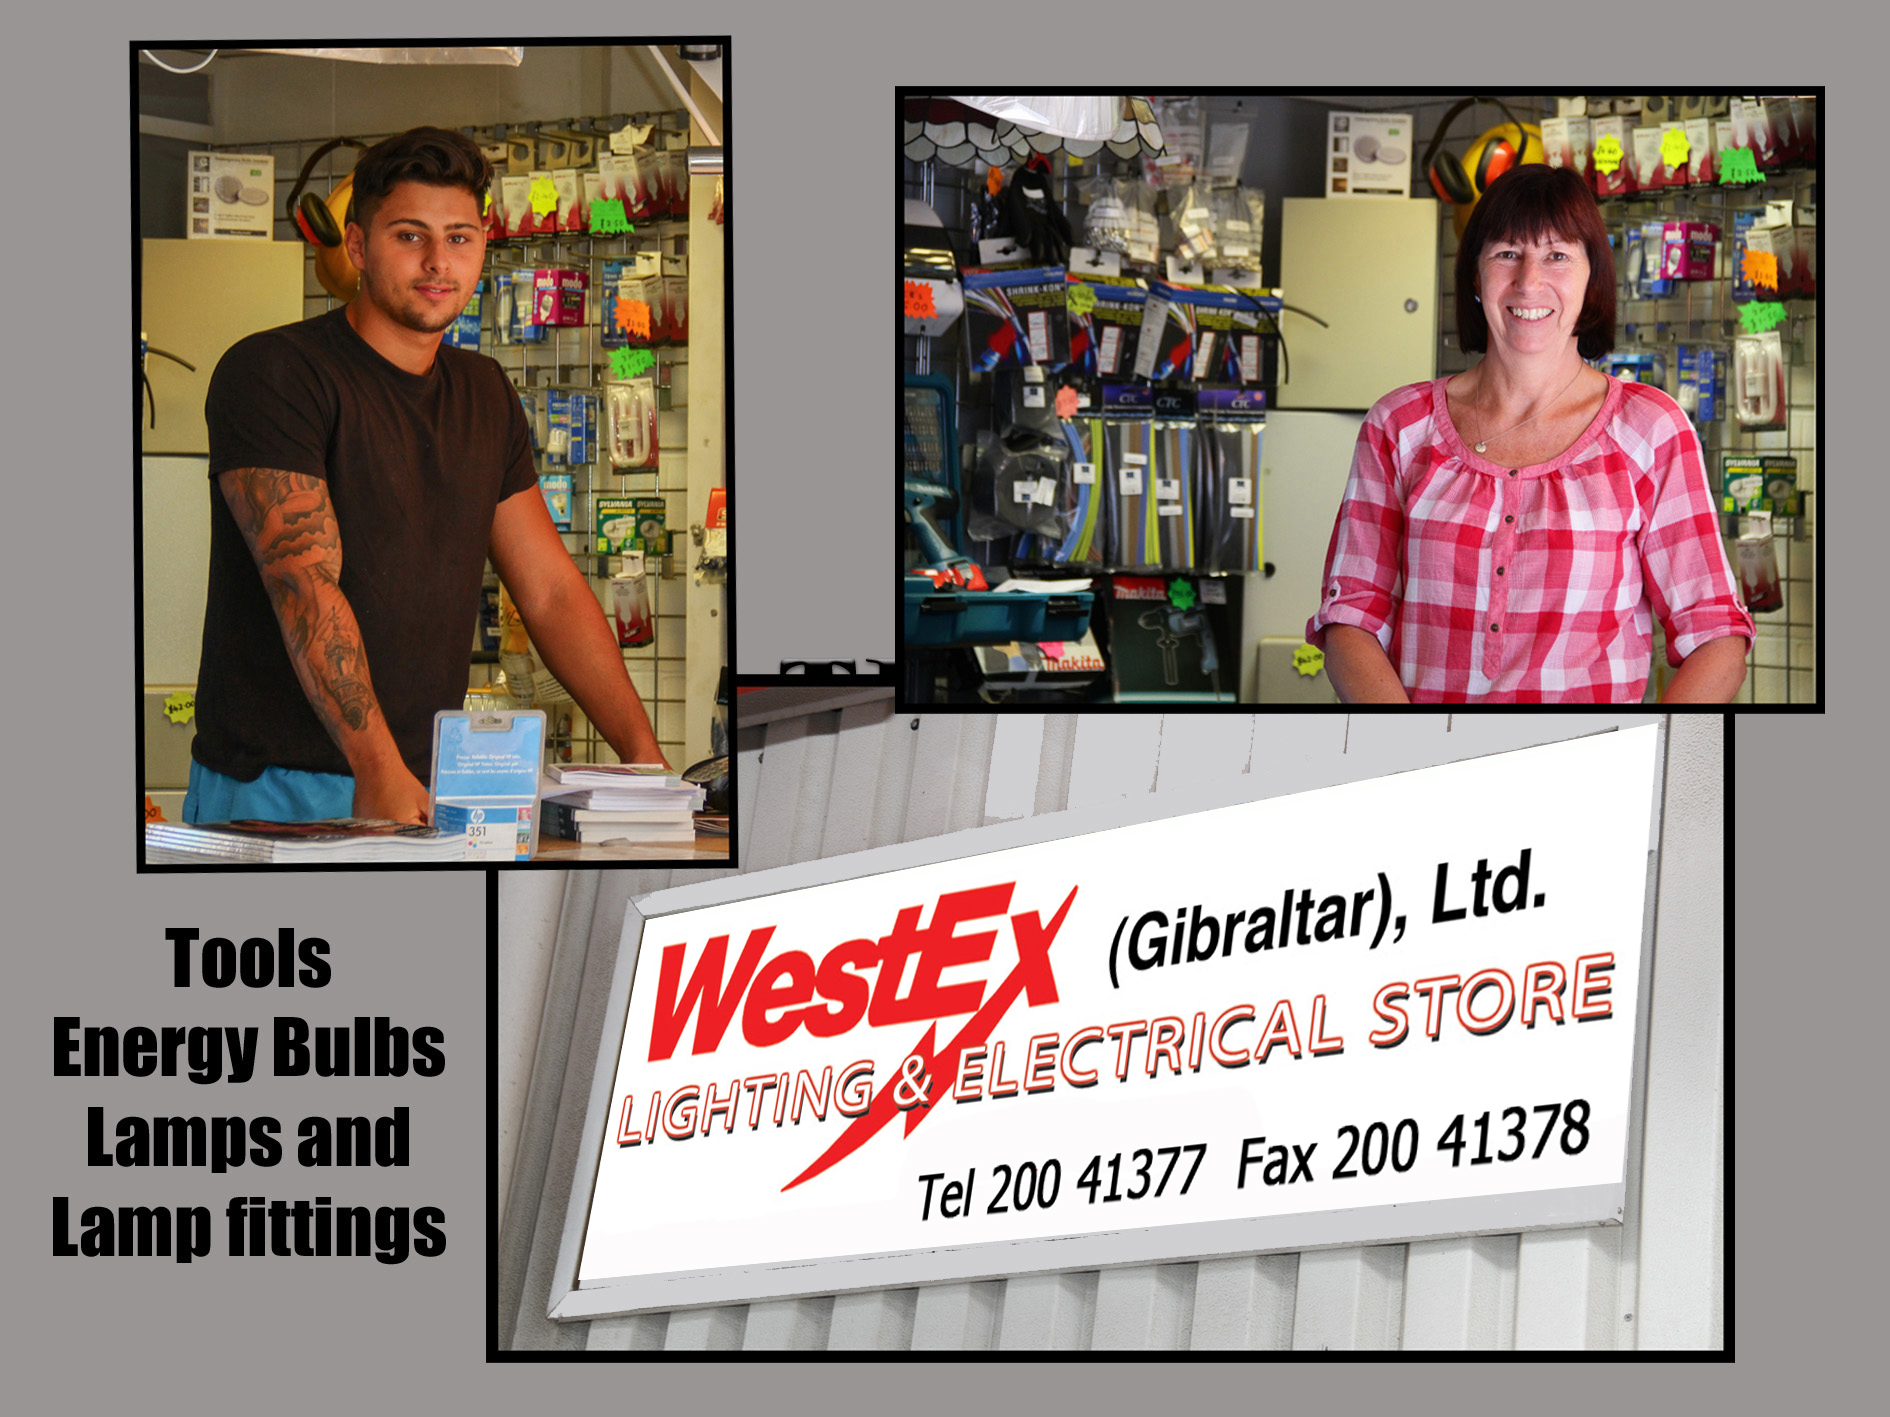 Westex electrical suppliers